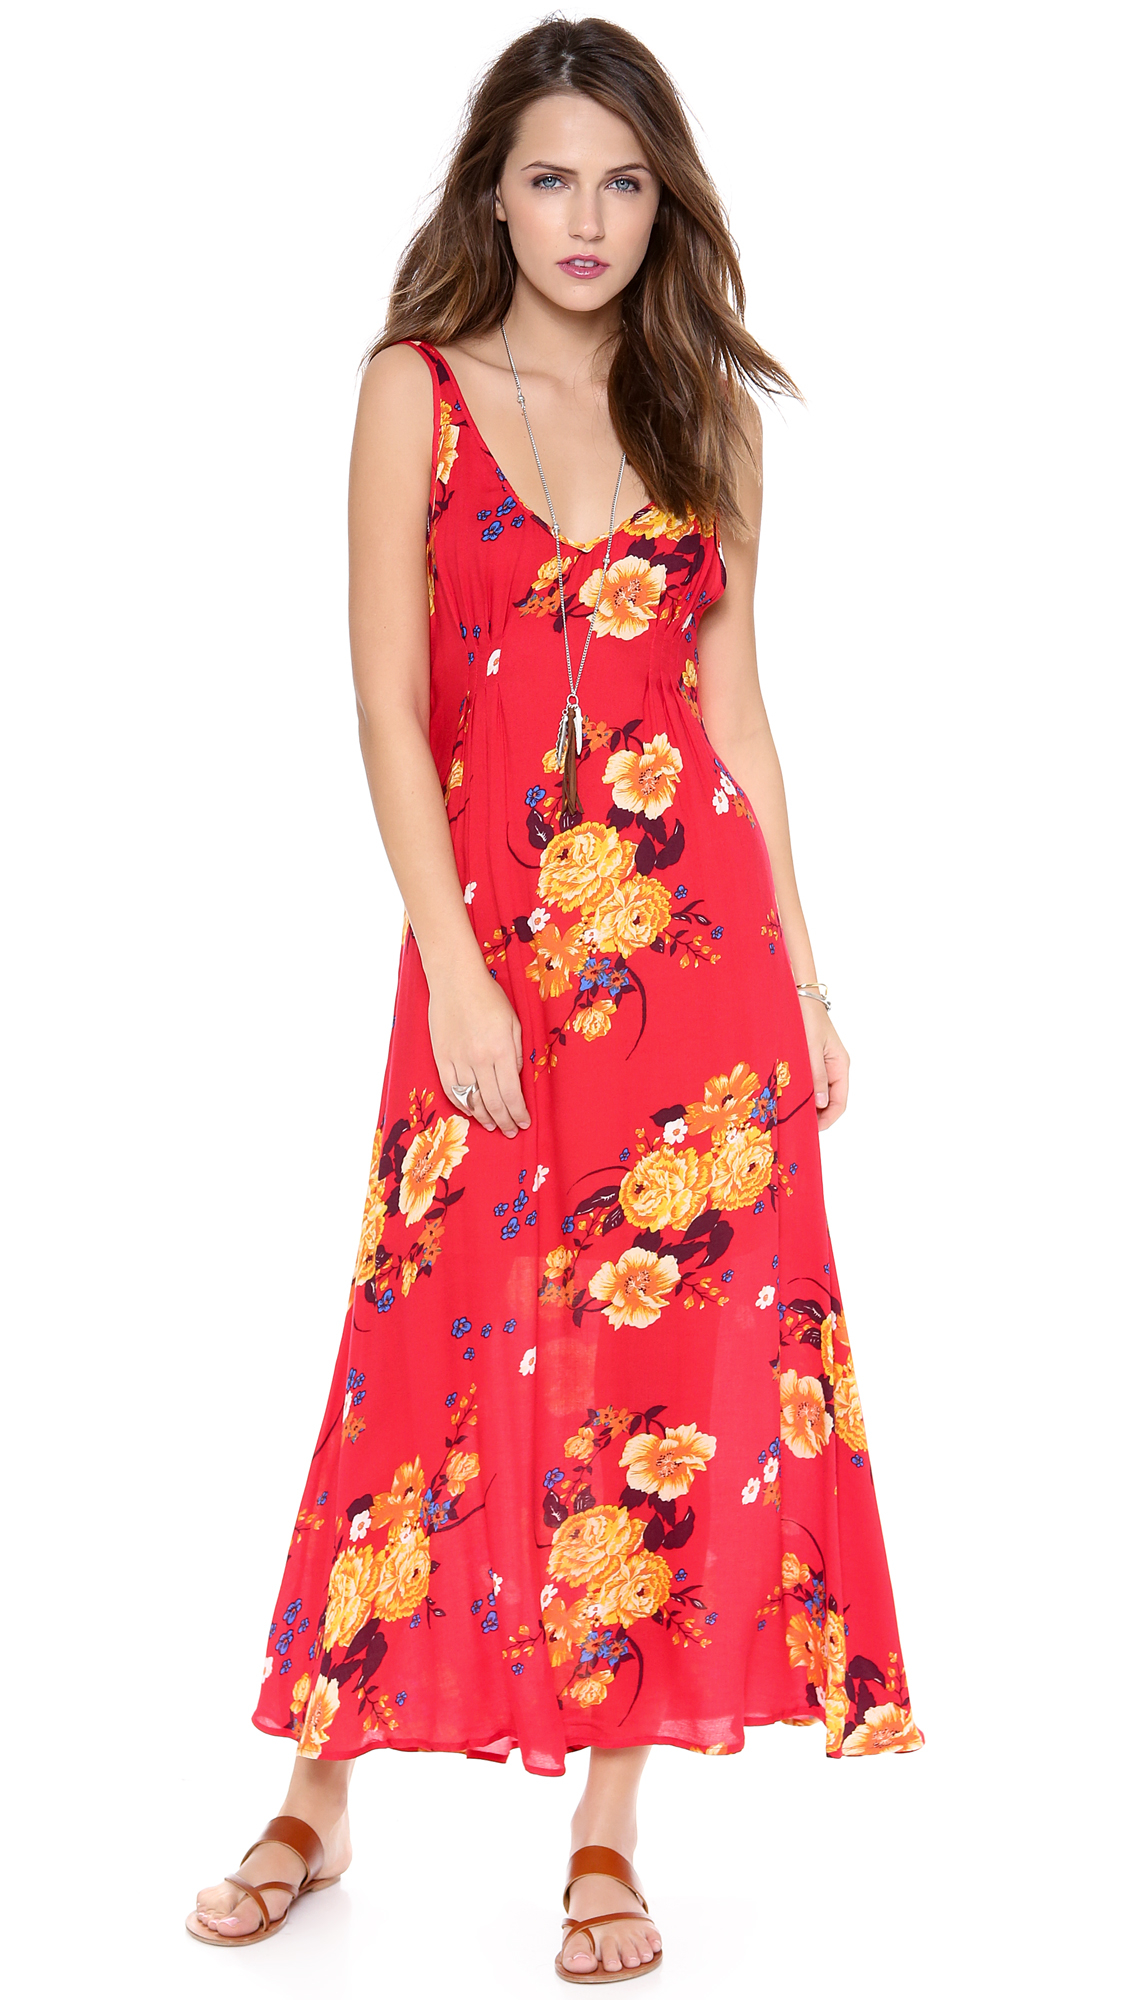 Lyst - Free People Cinched Printed Maxi Dress in Red